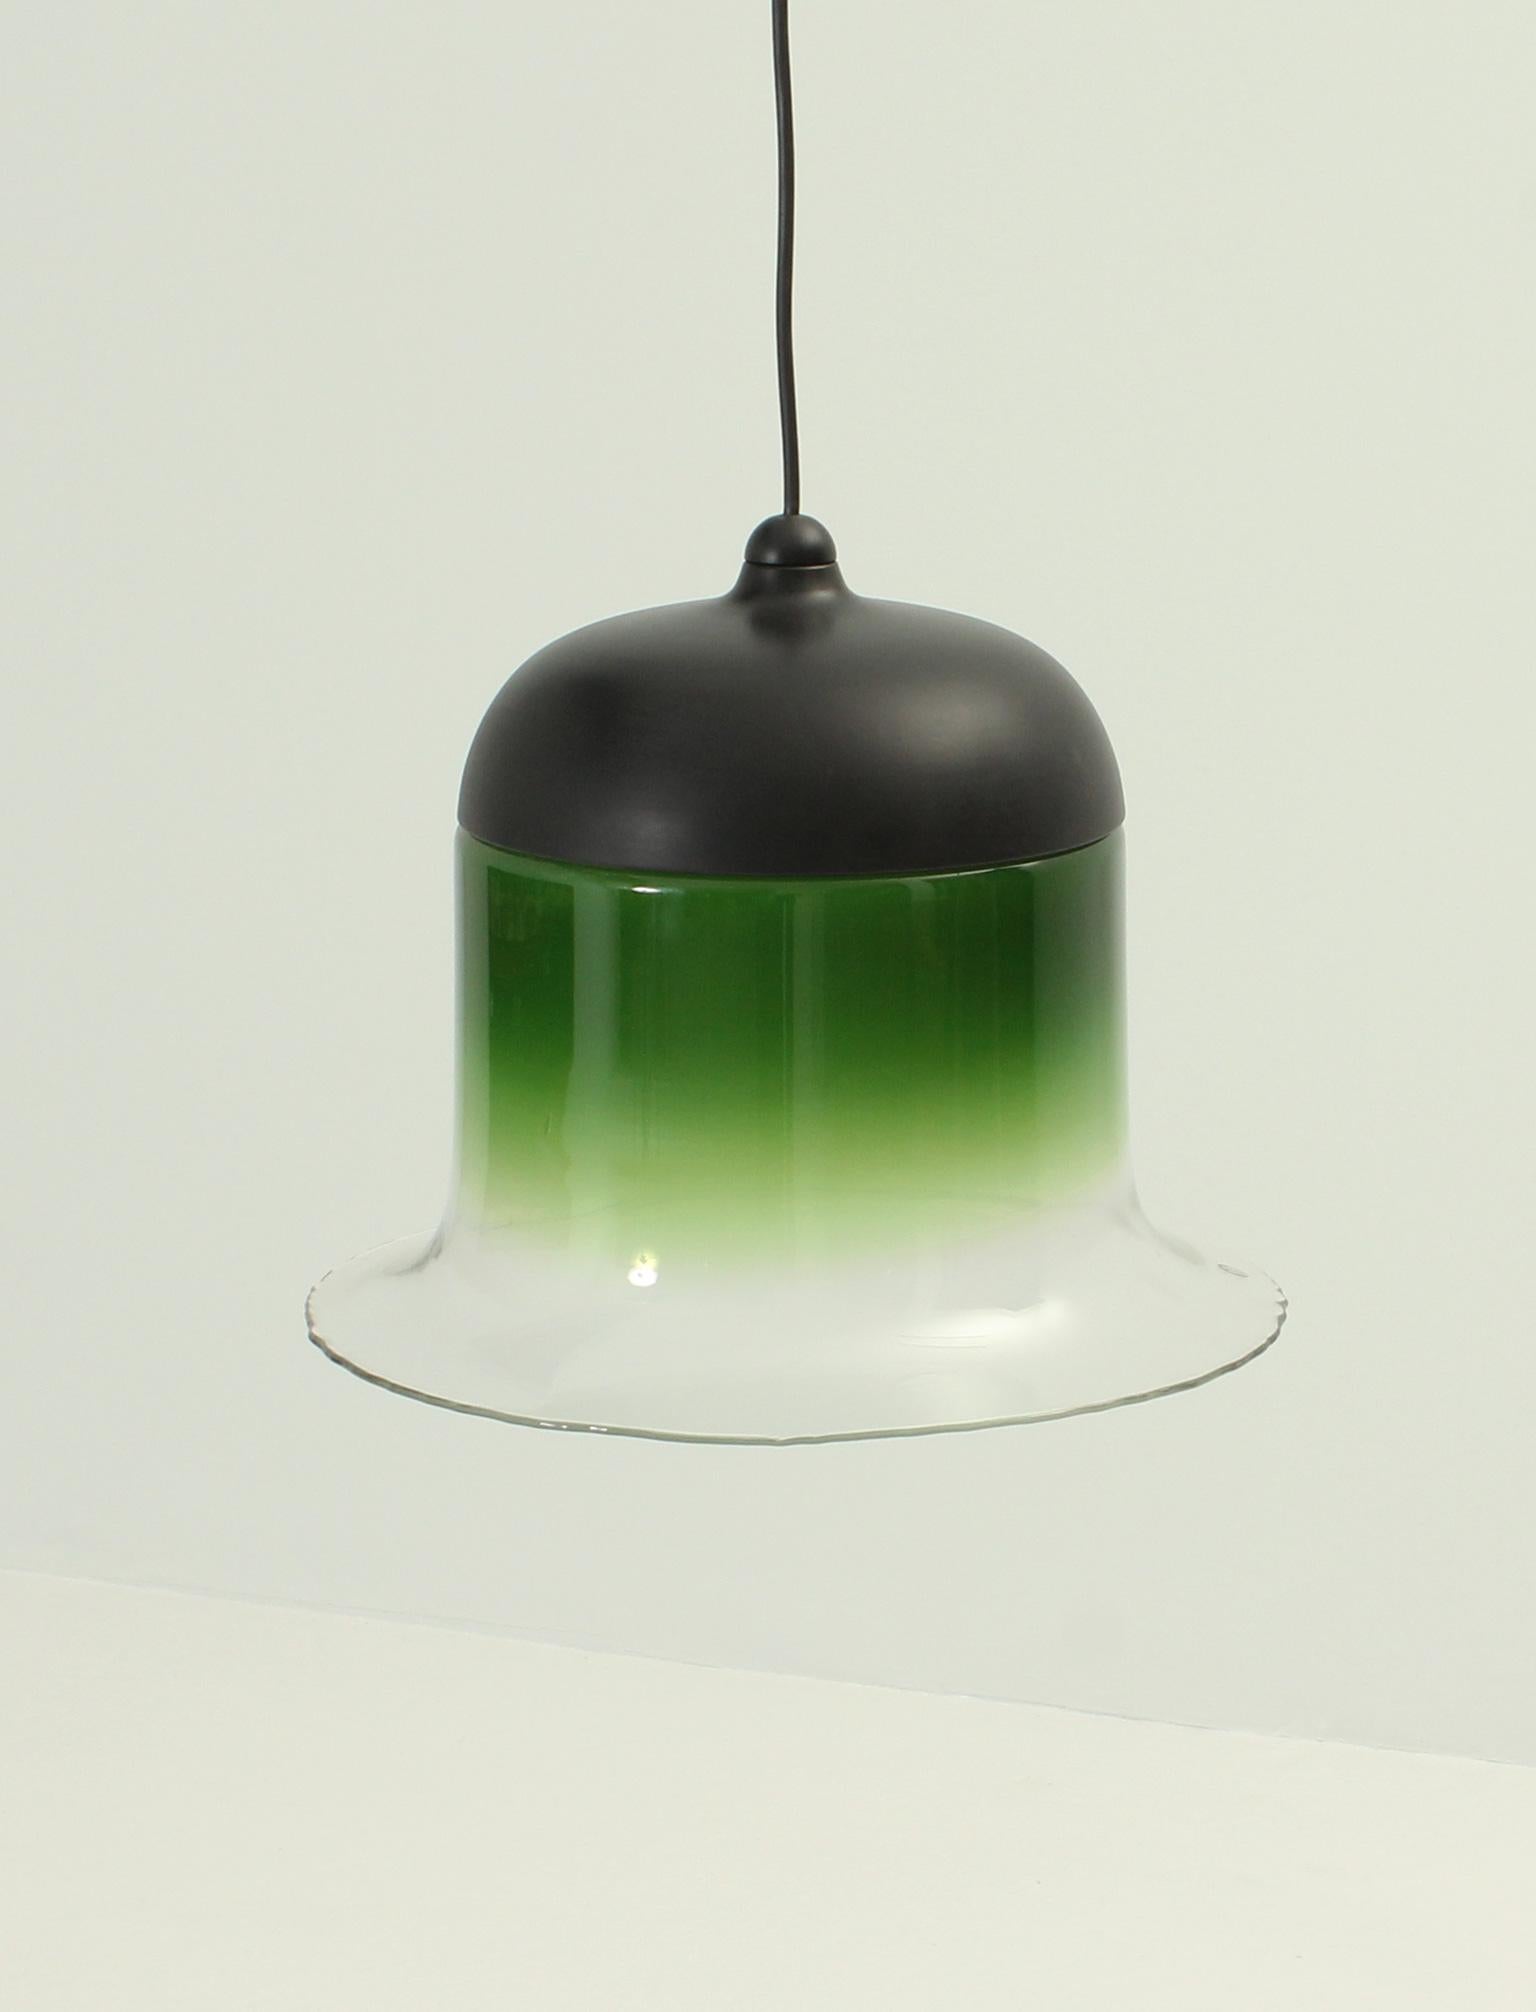 Ceiling lamp designed and produced by german company Peill & Putzler in 1972. Hand blown coloured glass and enamelled aluminum dome. This is the wide version of this lamp that imitates the effect of the projection of light in the colored part of the